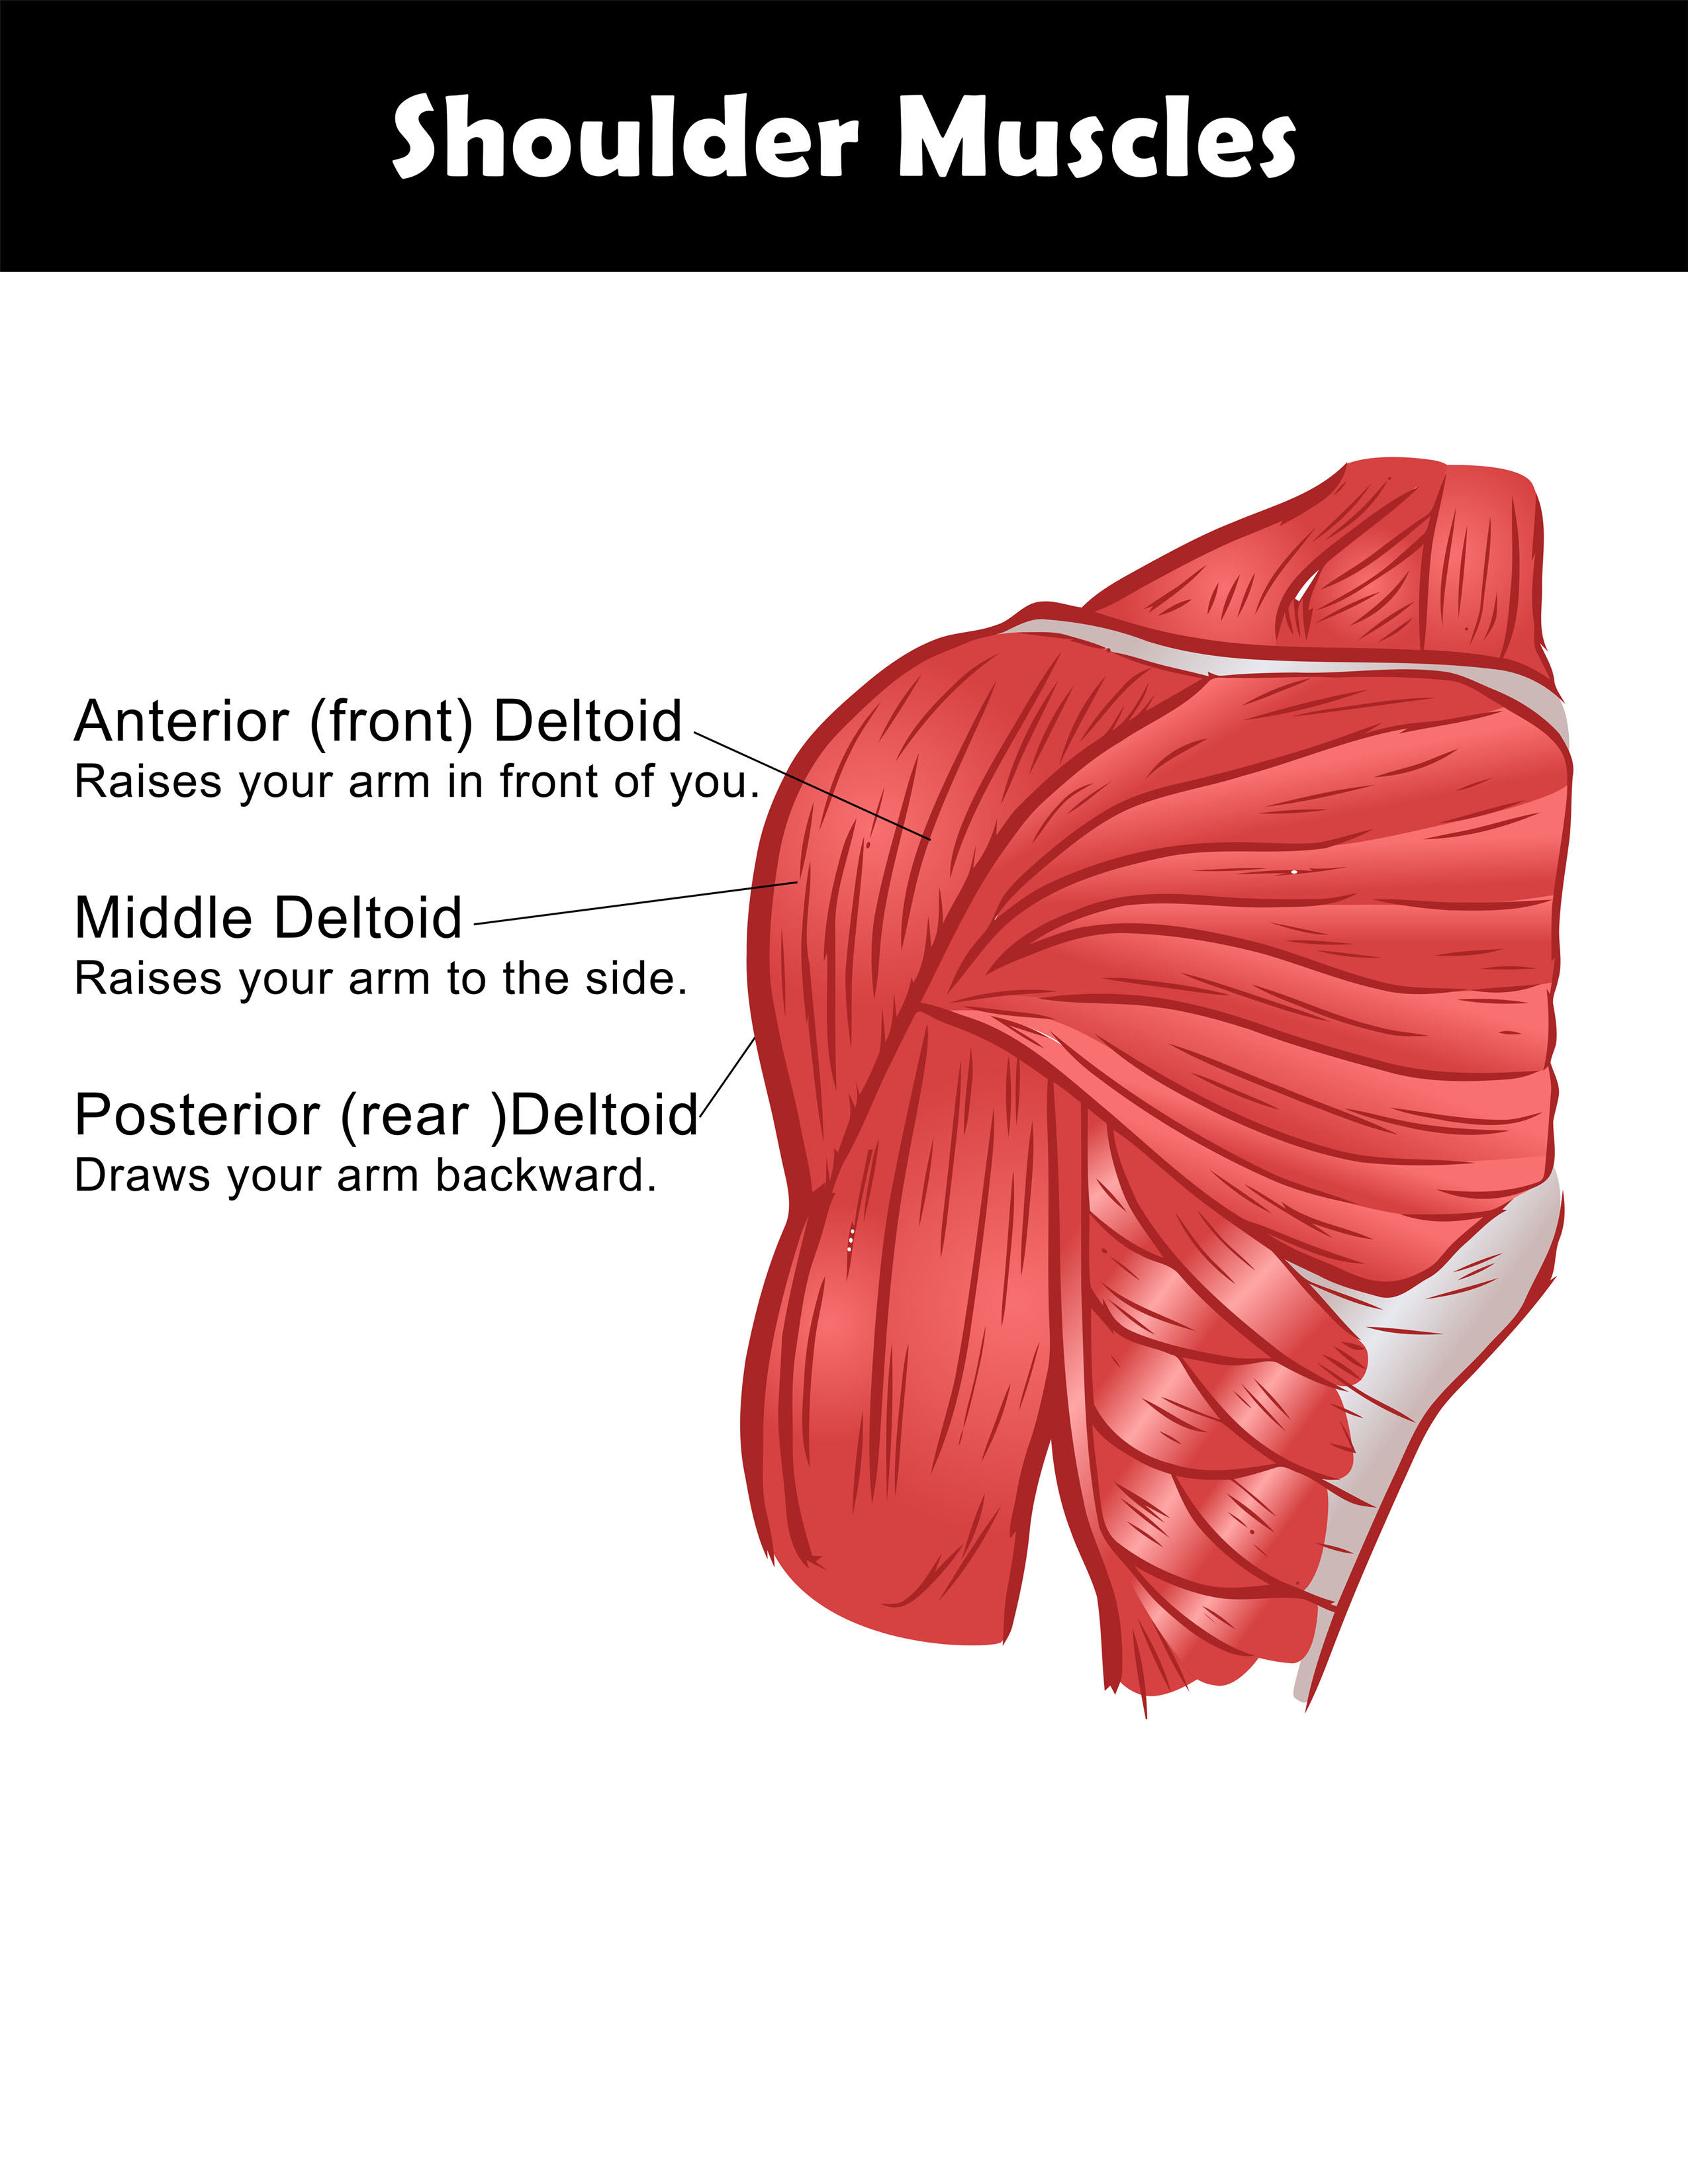 Shoulder muscle anatomy chart you can download and print. 